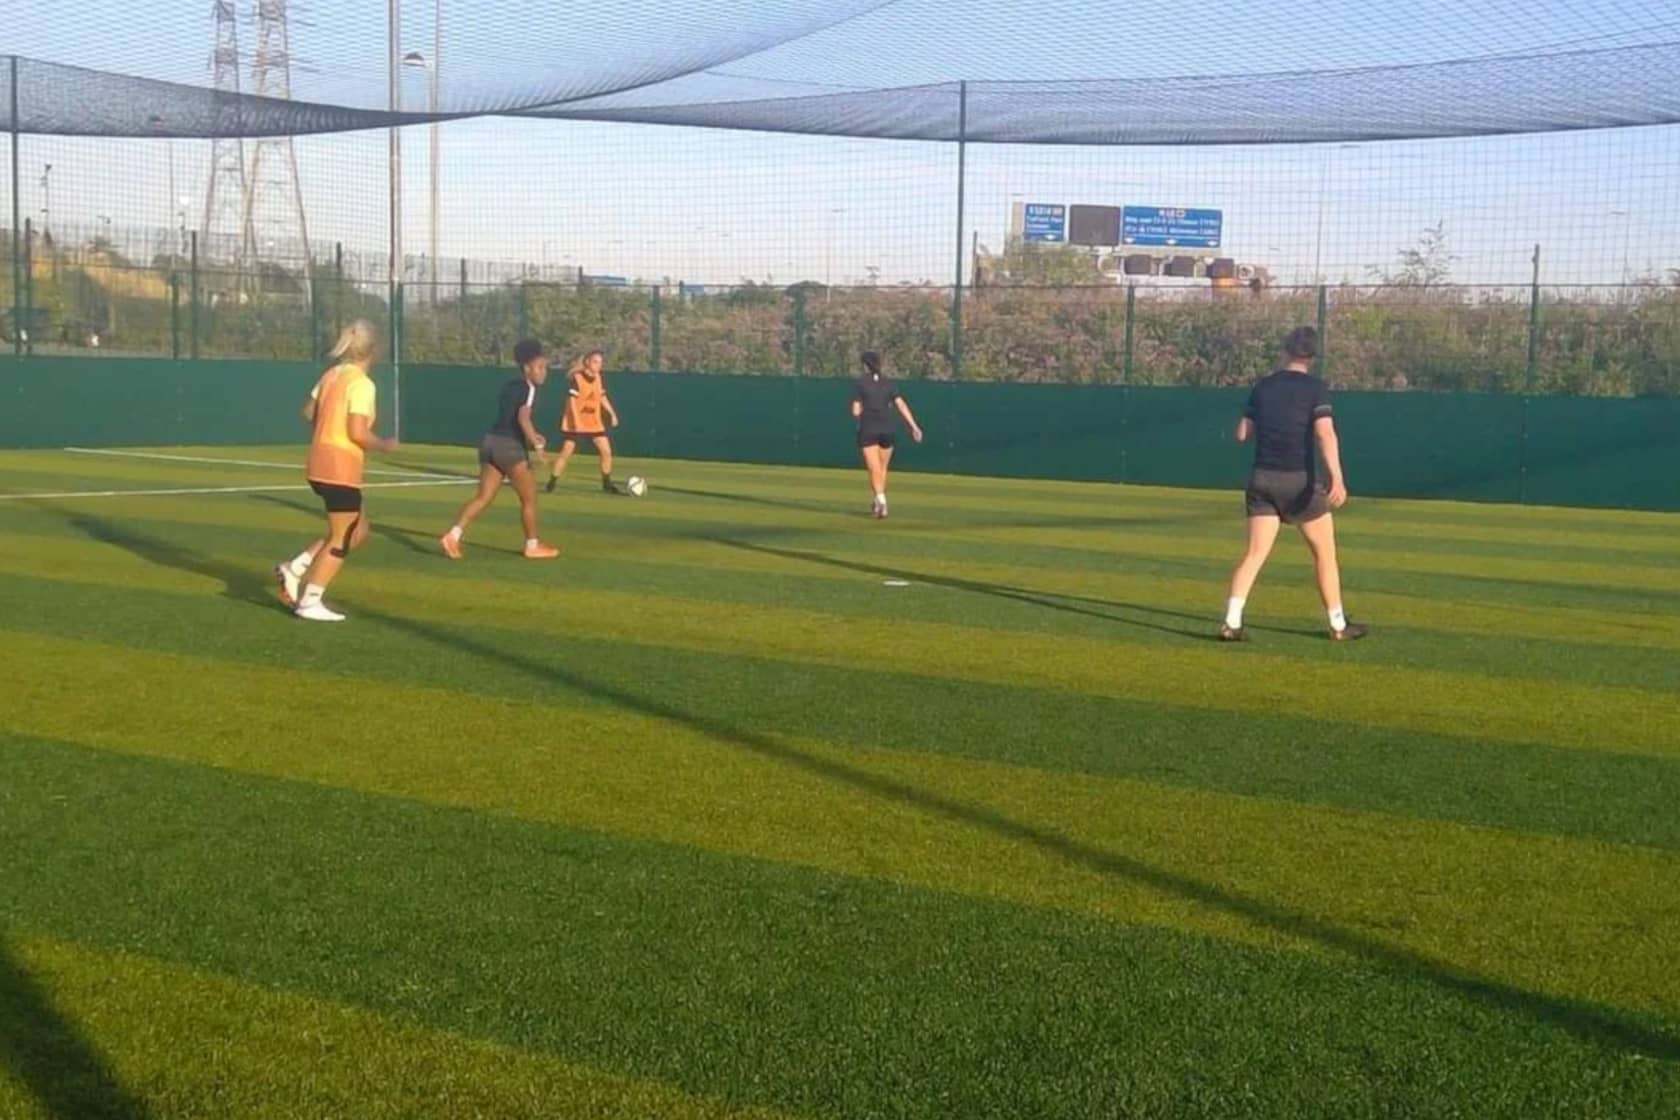 Tuesday Night Ladies 6aside League